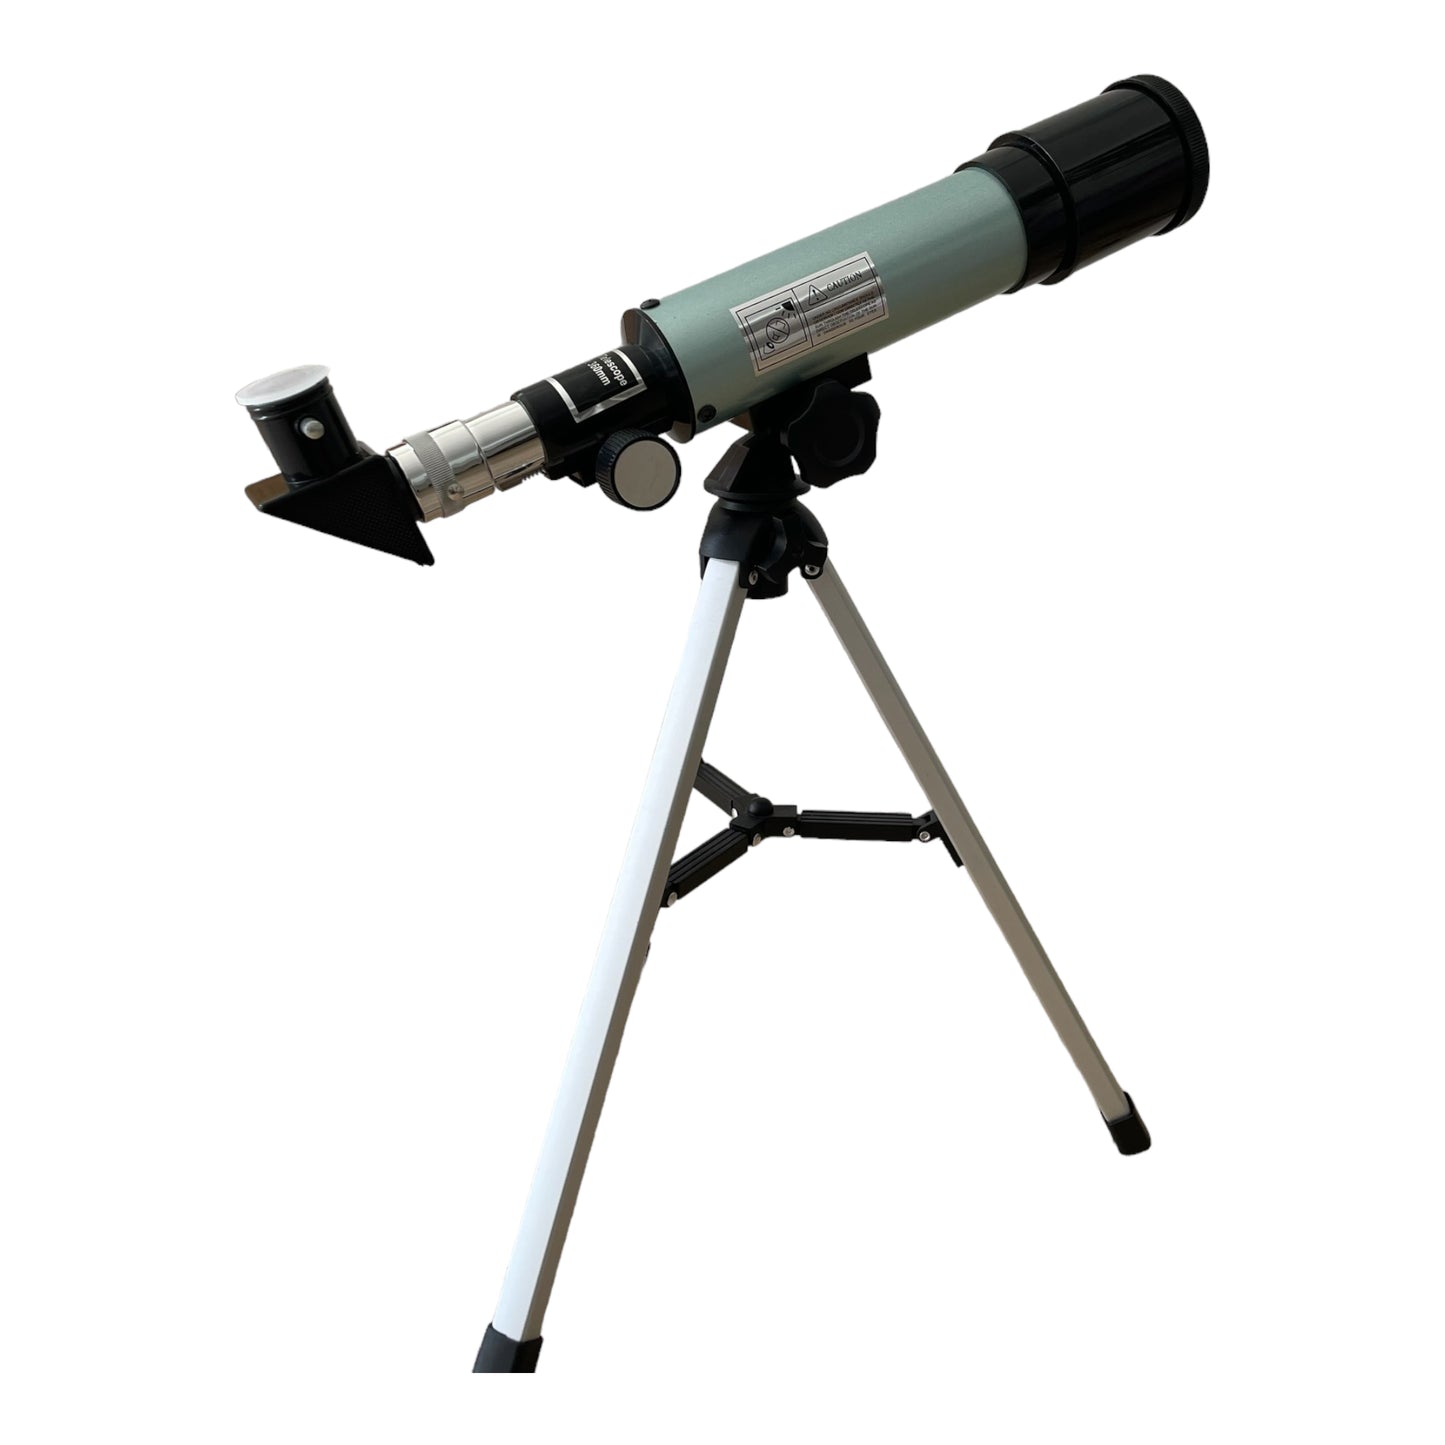 F36050 Science Stargazing Astronomical Telescope With Tripod Hd 360mm Focal Optical and Metal tube